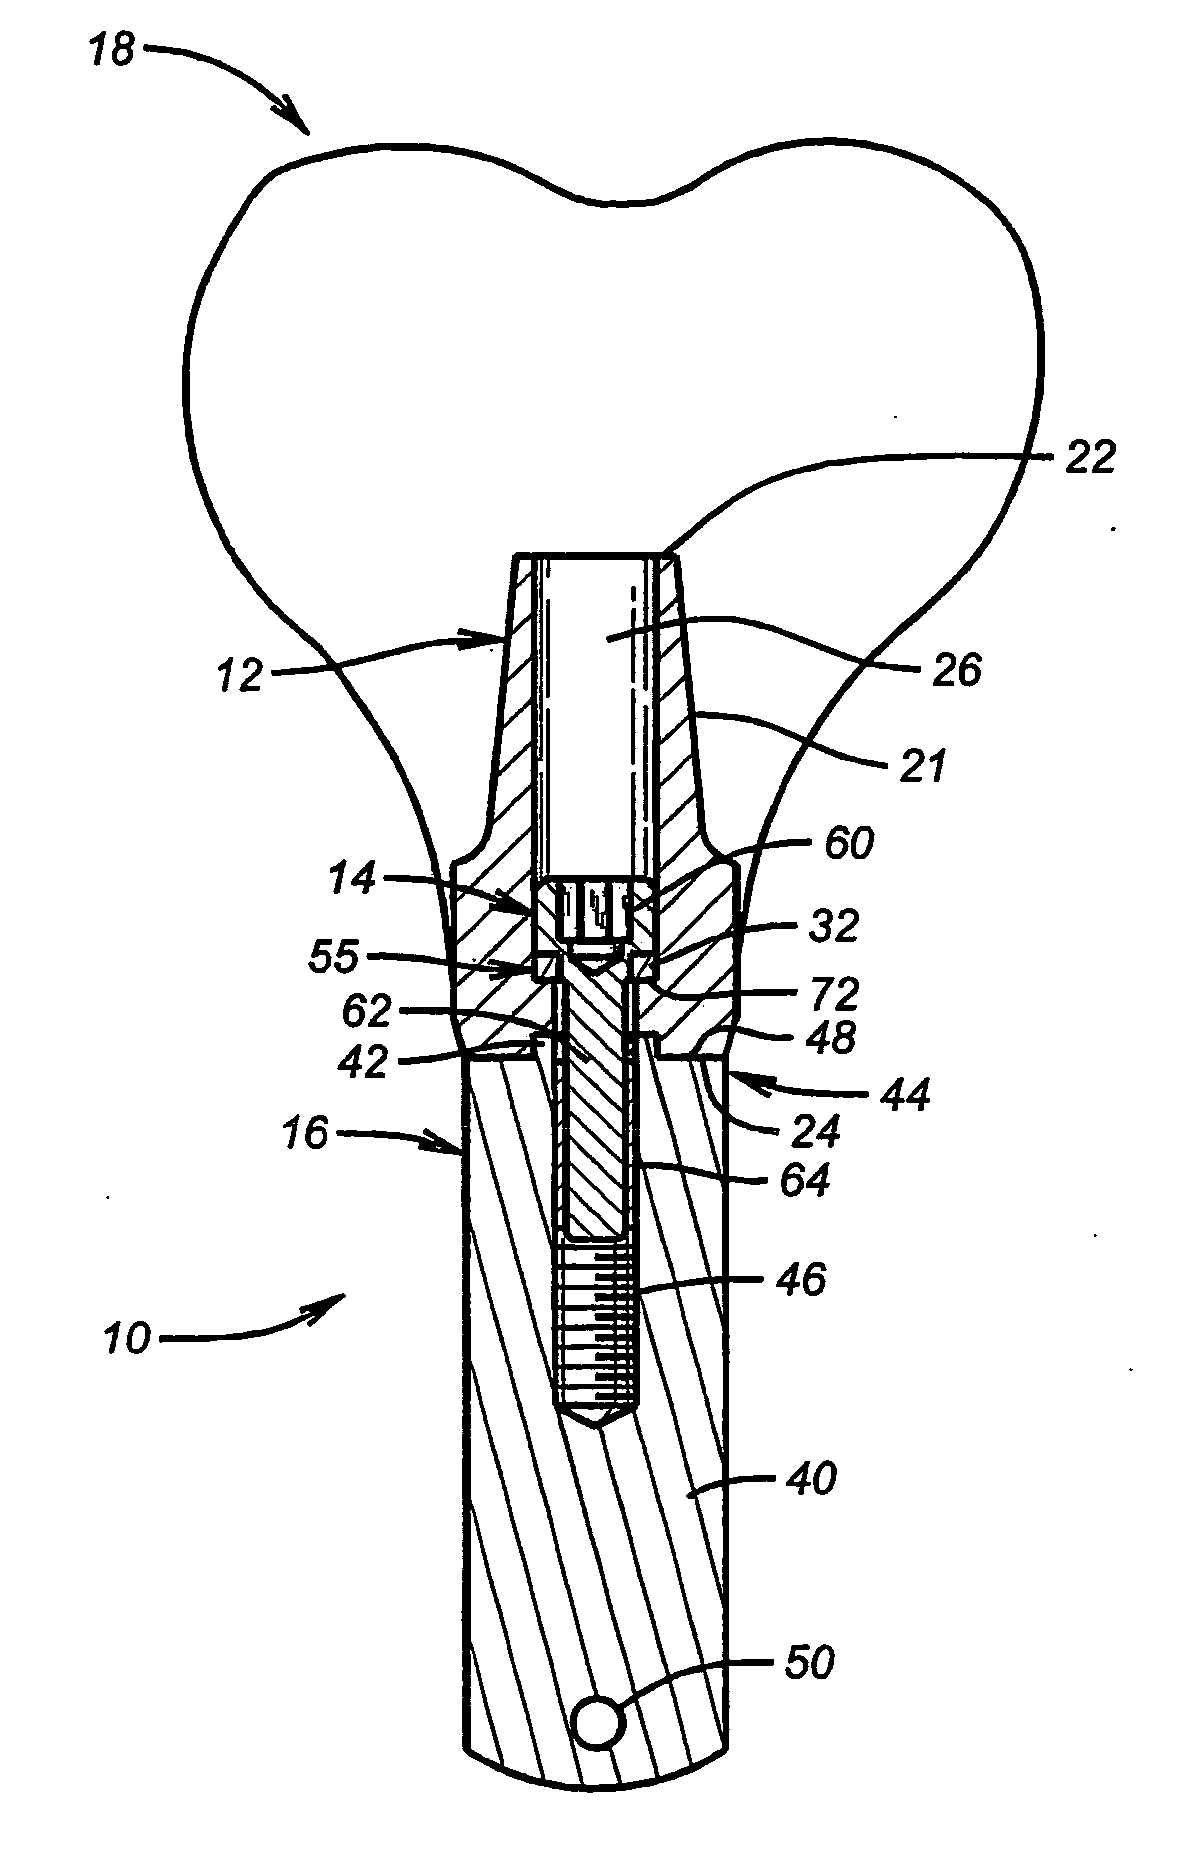 Abutment screw with spring-washer